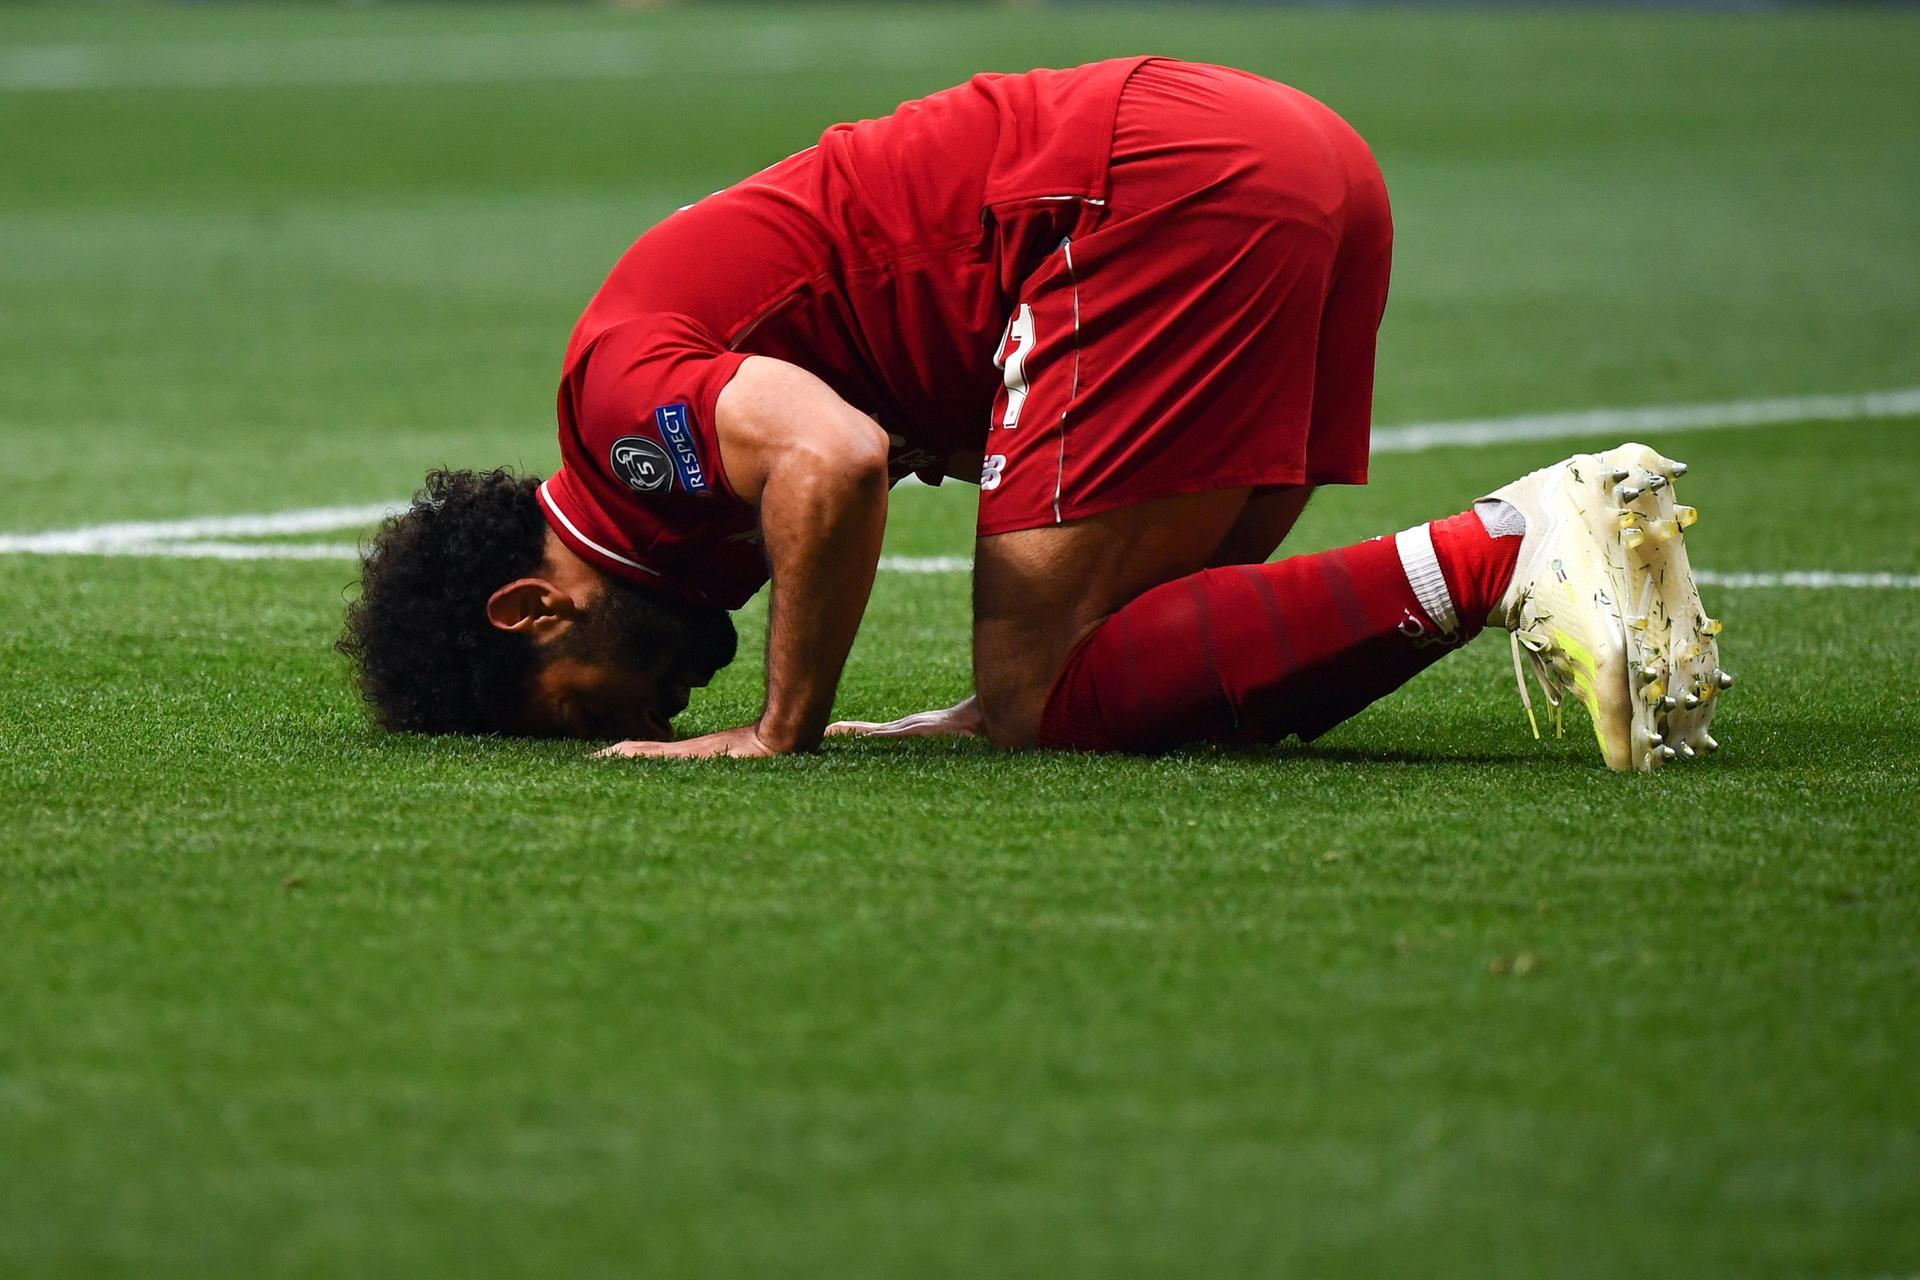 In addition to prodigious talent, Mohamed Salah has brought joy and  understanding to English football